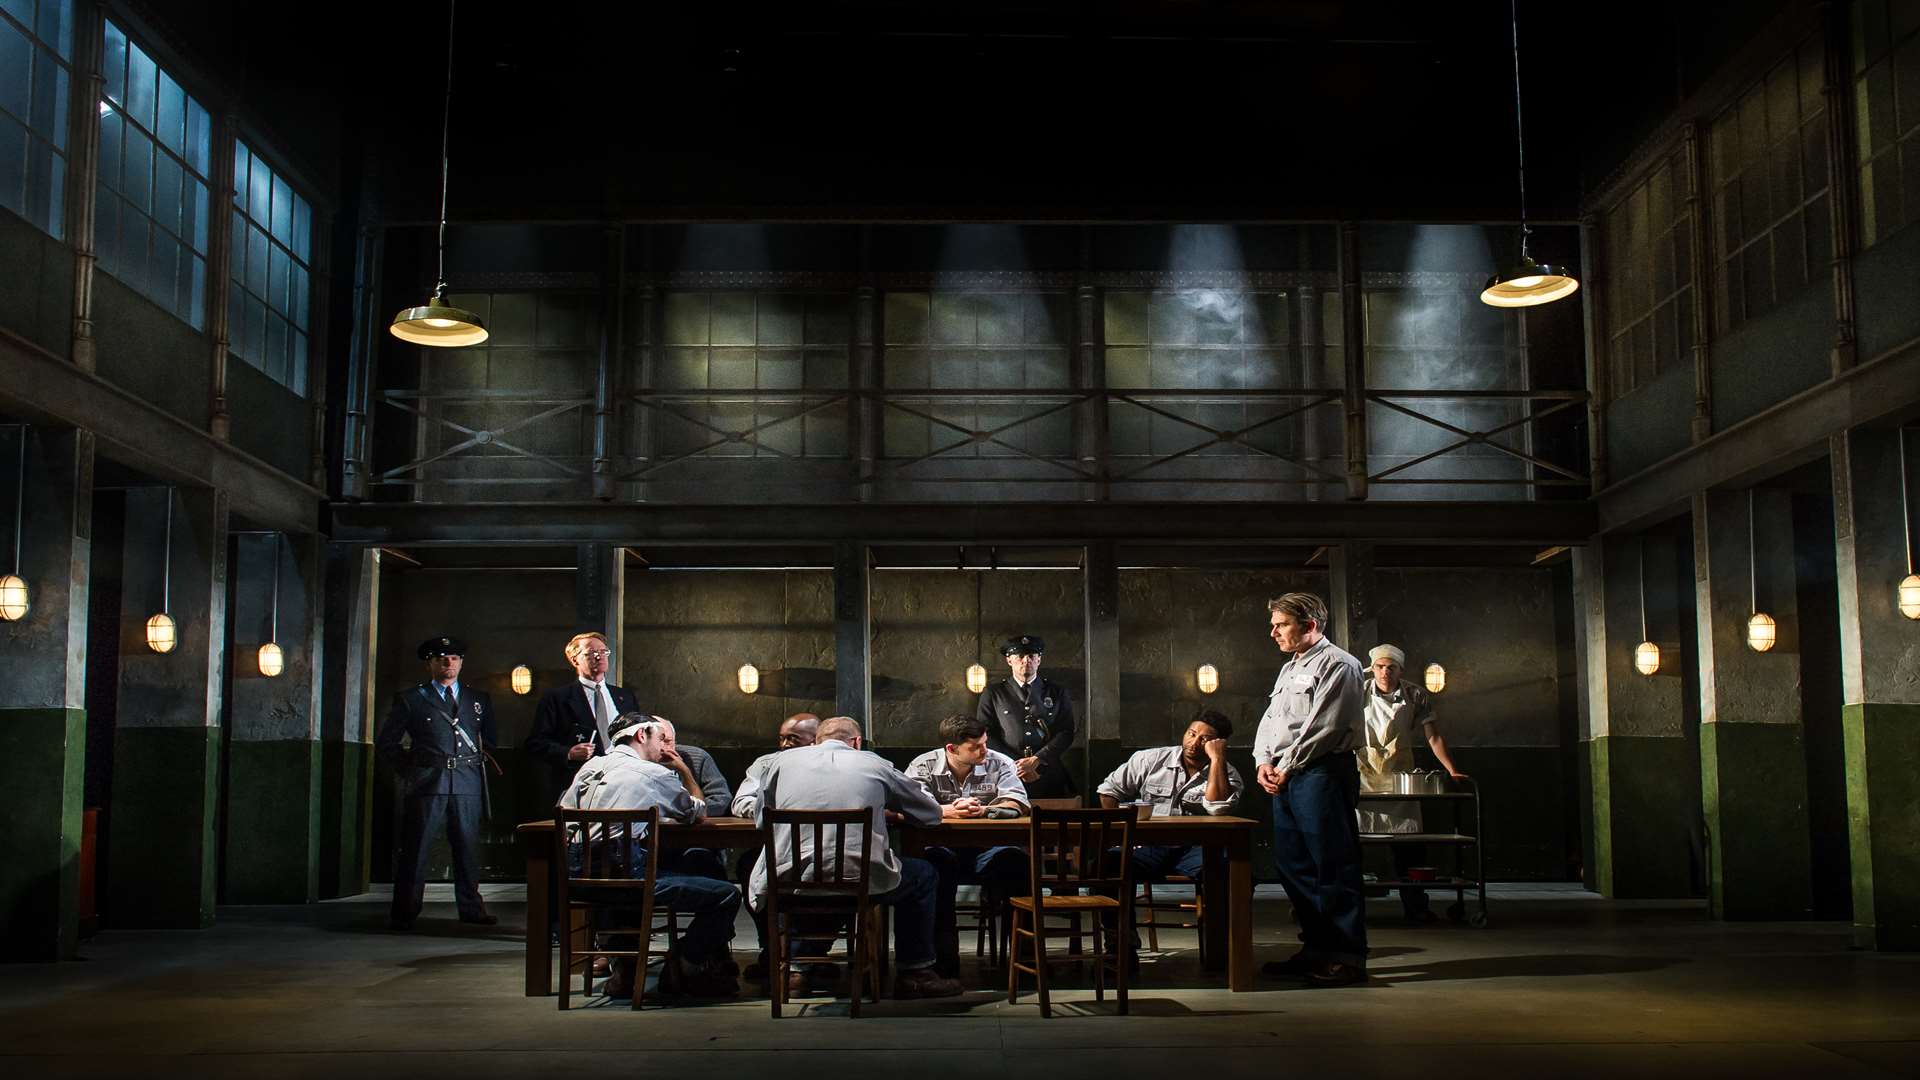 Shawshank Redemption is showing at the Marlowe Theatre until Saturday, September 17